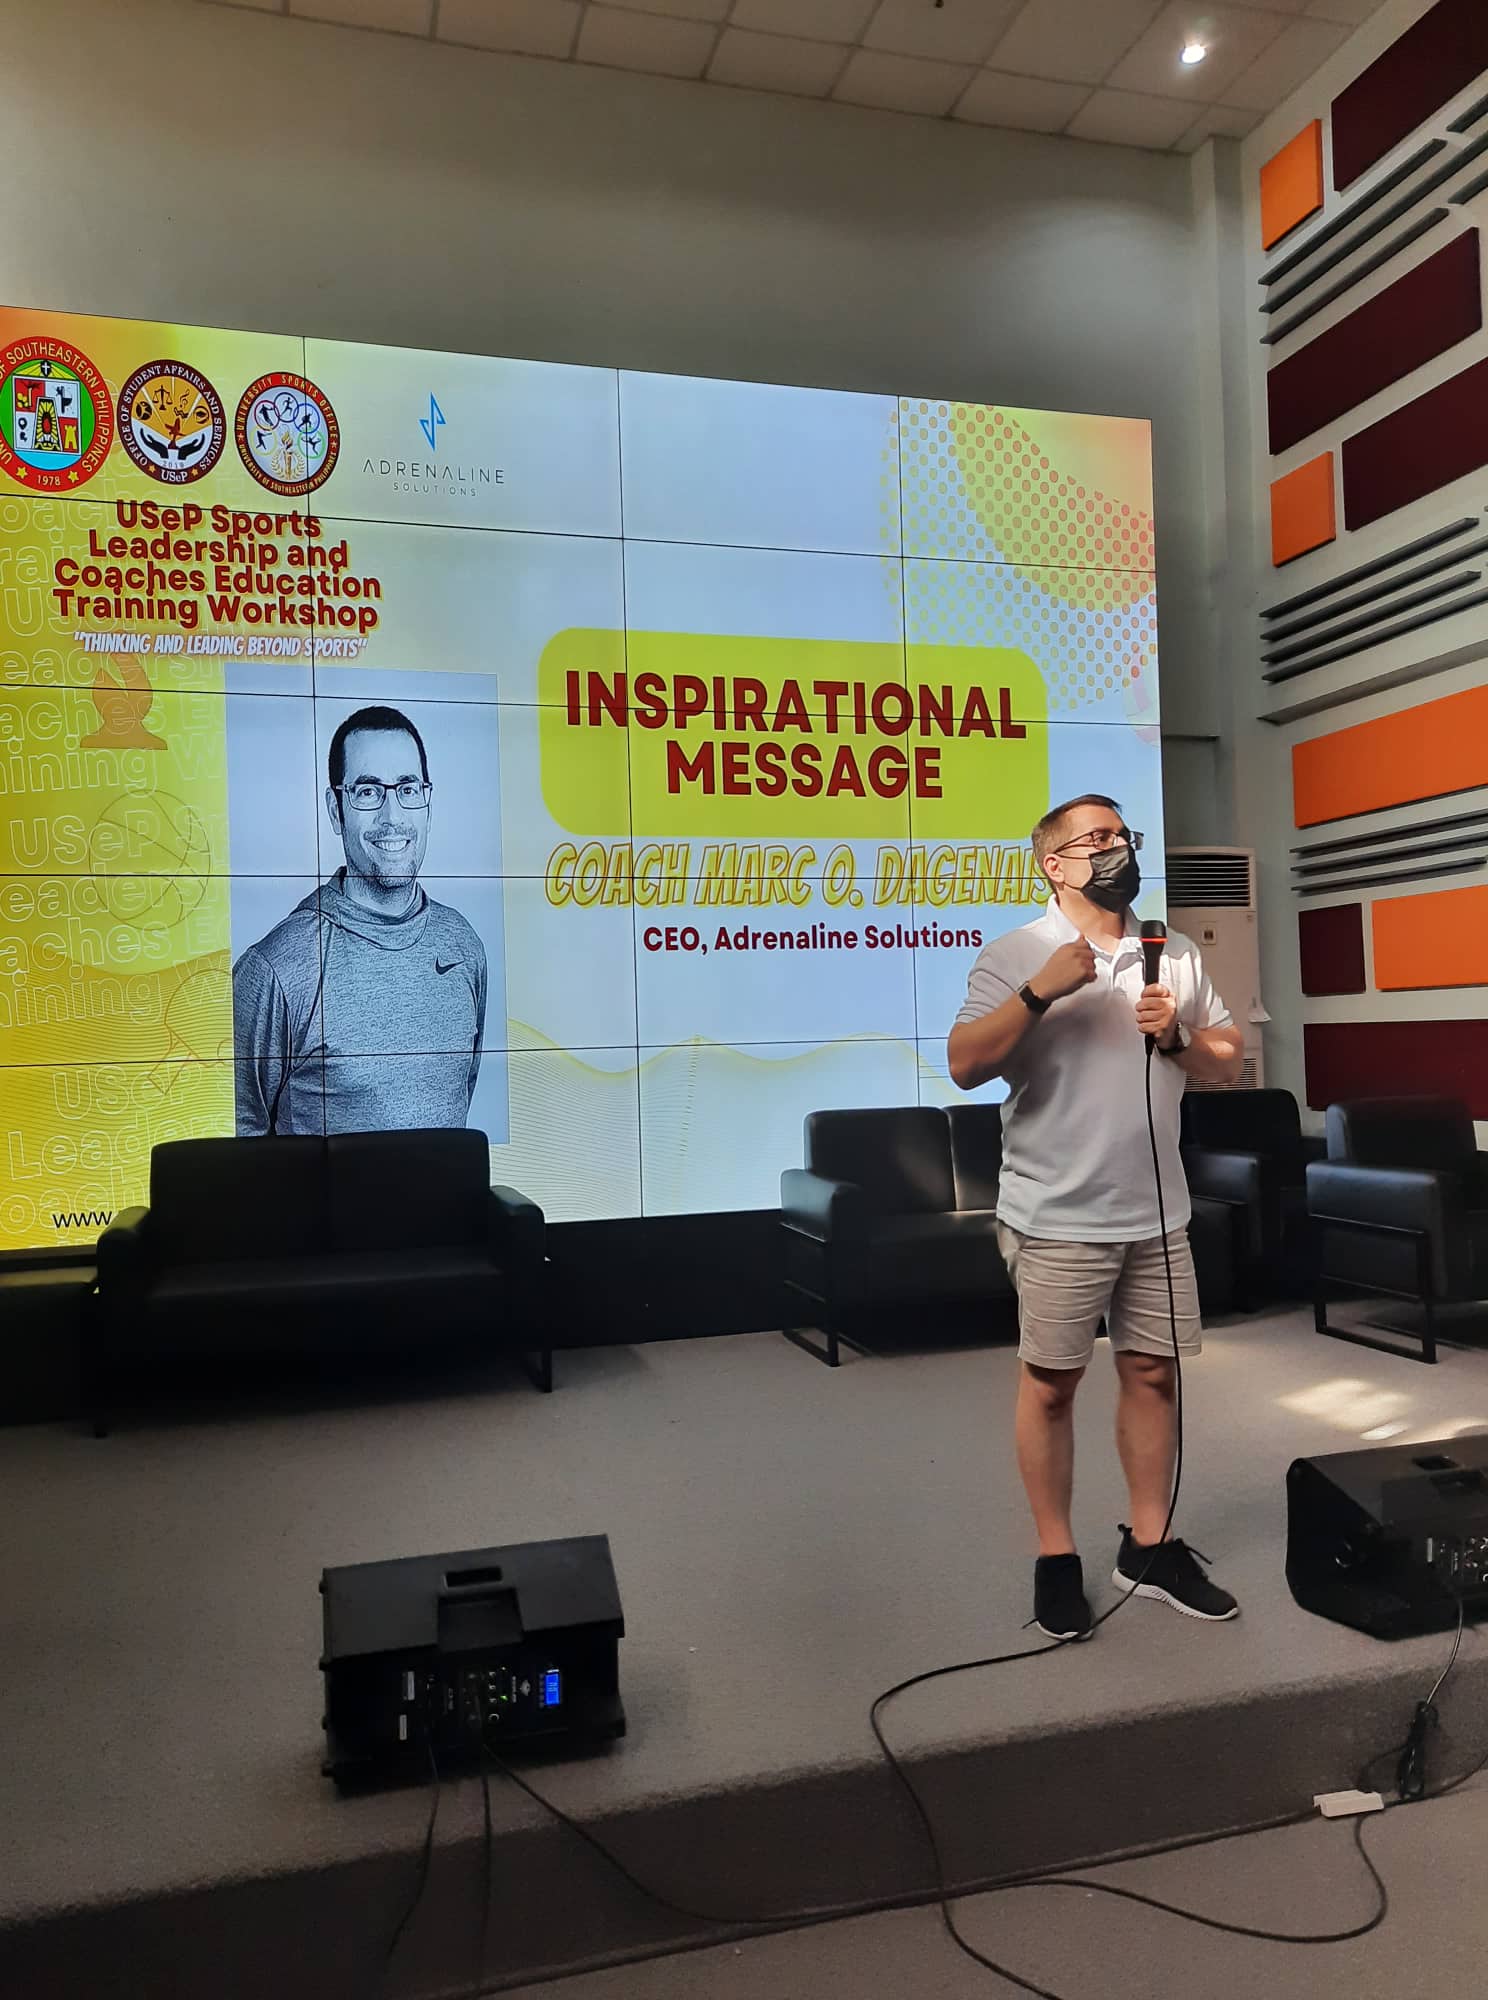 Coach Marc onstage at the University of Southeastern Philippines Sports Leadership and Coaches Education Training Workshop